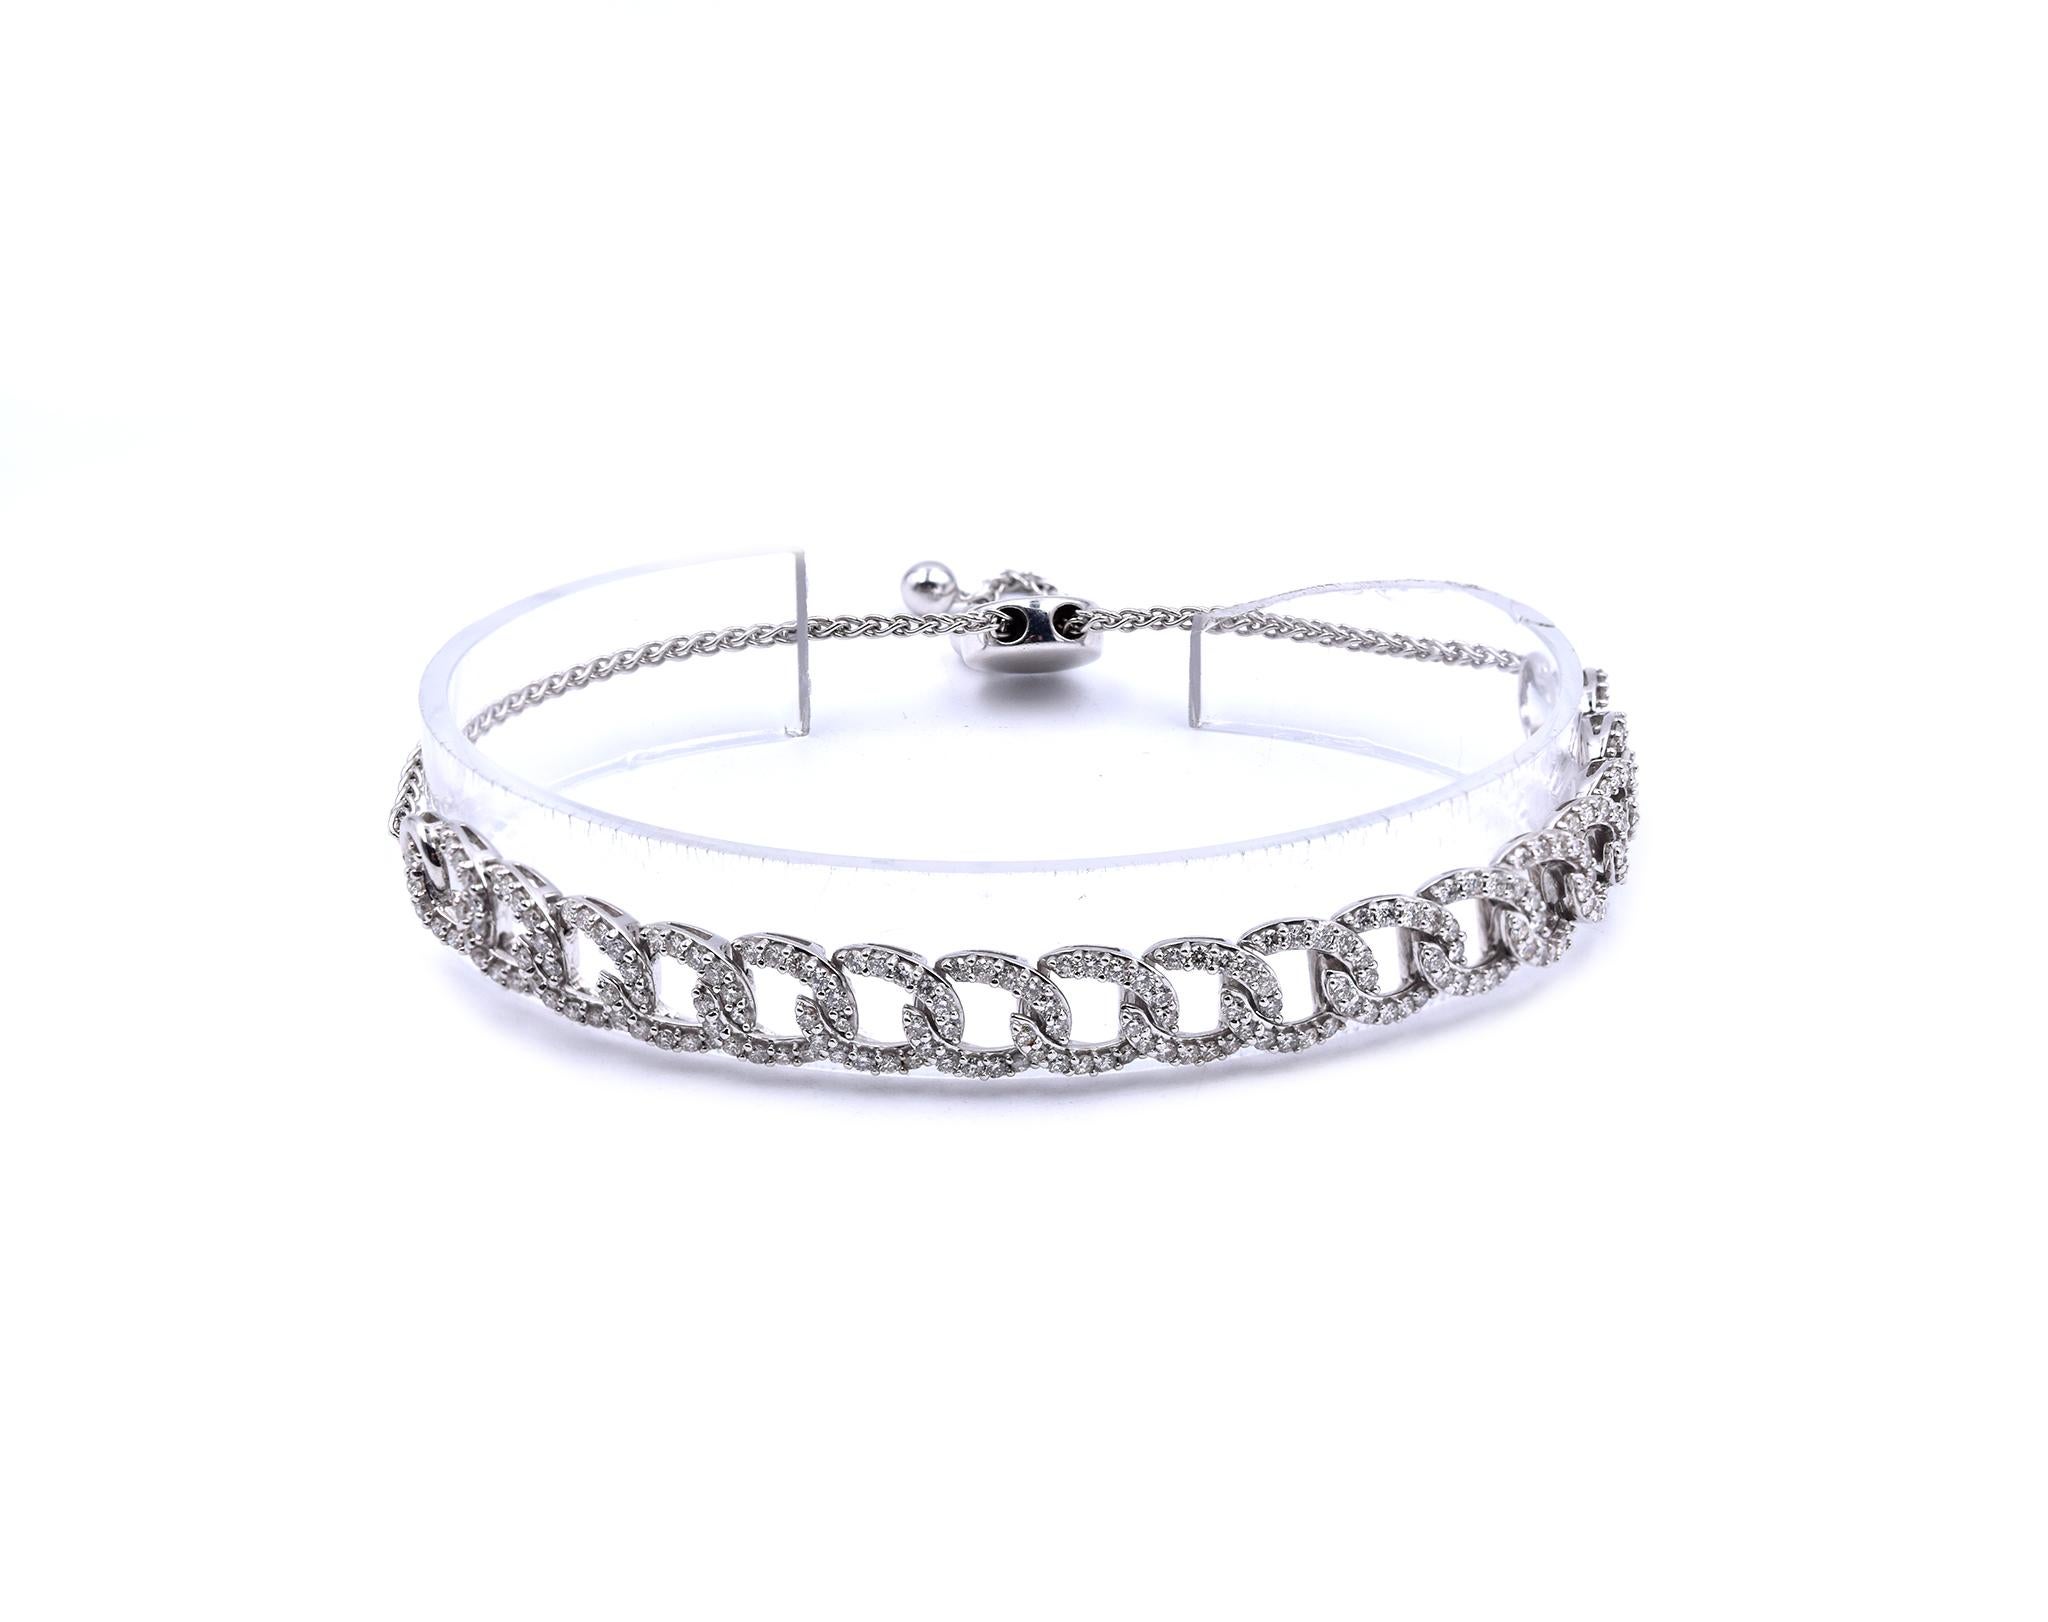 Designer: custom
Material: 10K white gold
Round Diamonds: 204 round brilliant cuts = 2.0cttw
Color: G
Clarity: VS
Dimensions: the bracelet measures 4.25 inches in length 
Weight: 11.39 grams